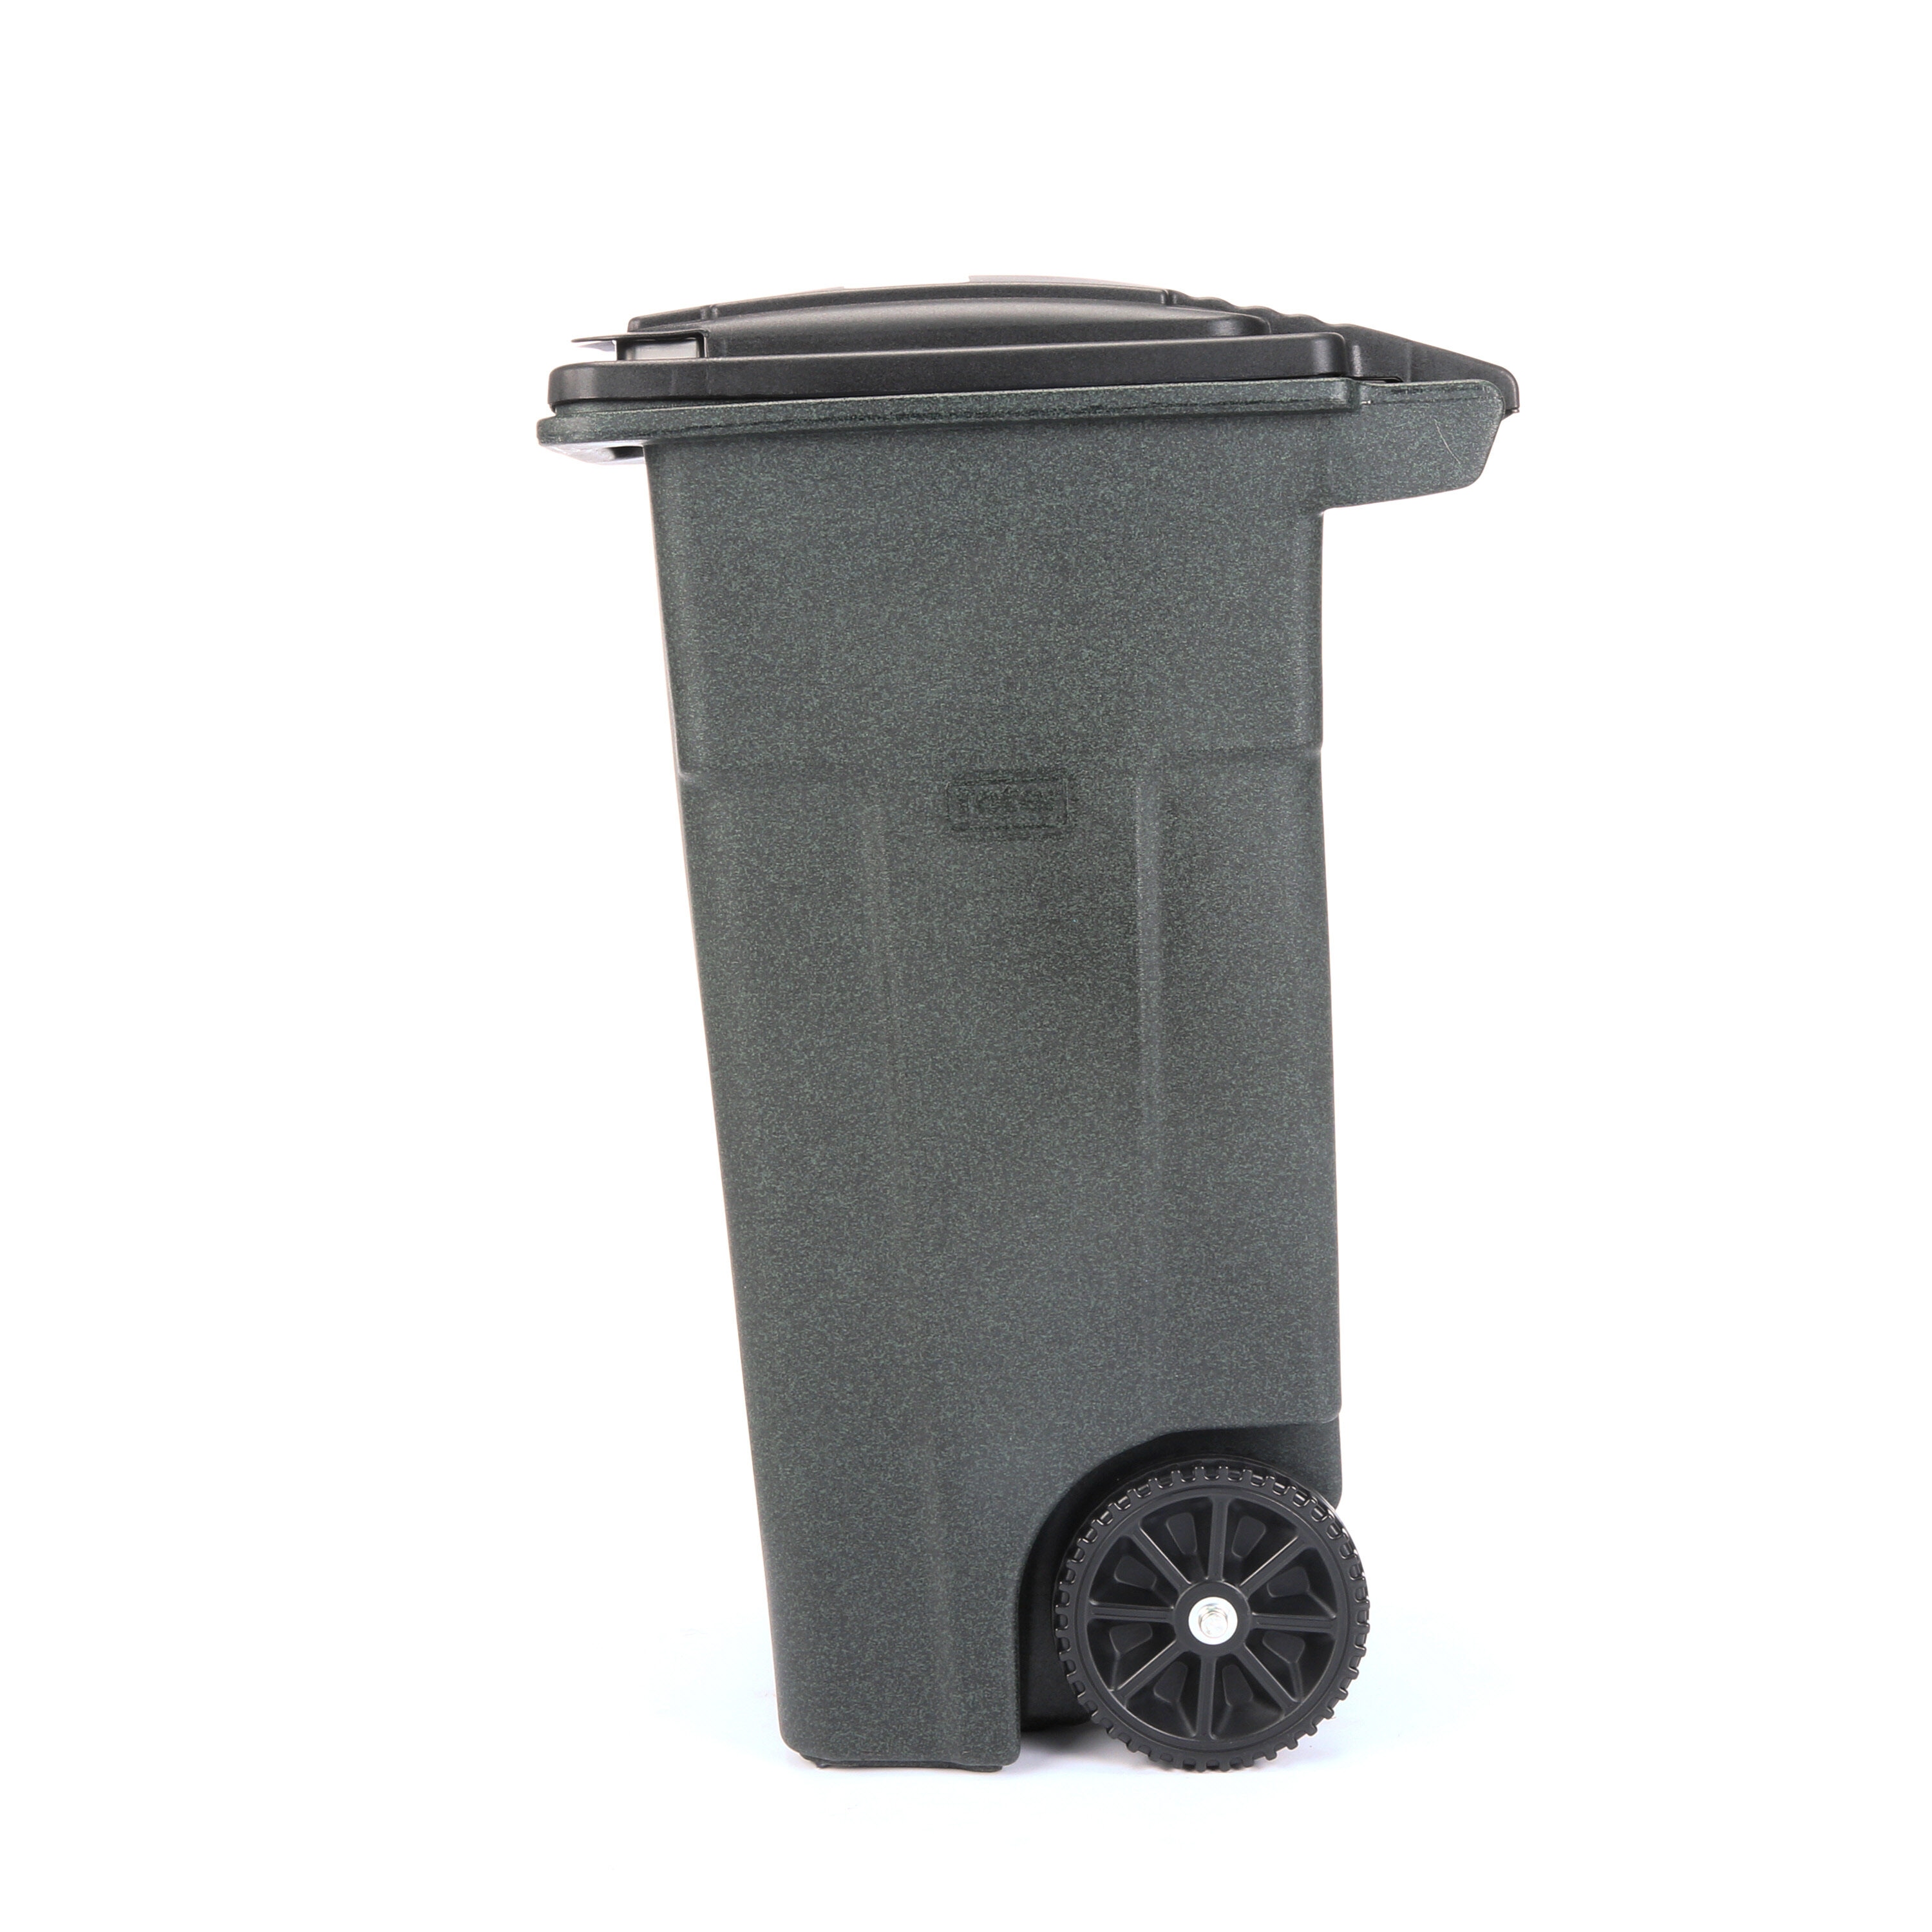 Toter 32-Gallons Greenstone Plastic Wheeled Kitchen Trash Can with Lid  Outdoor at